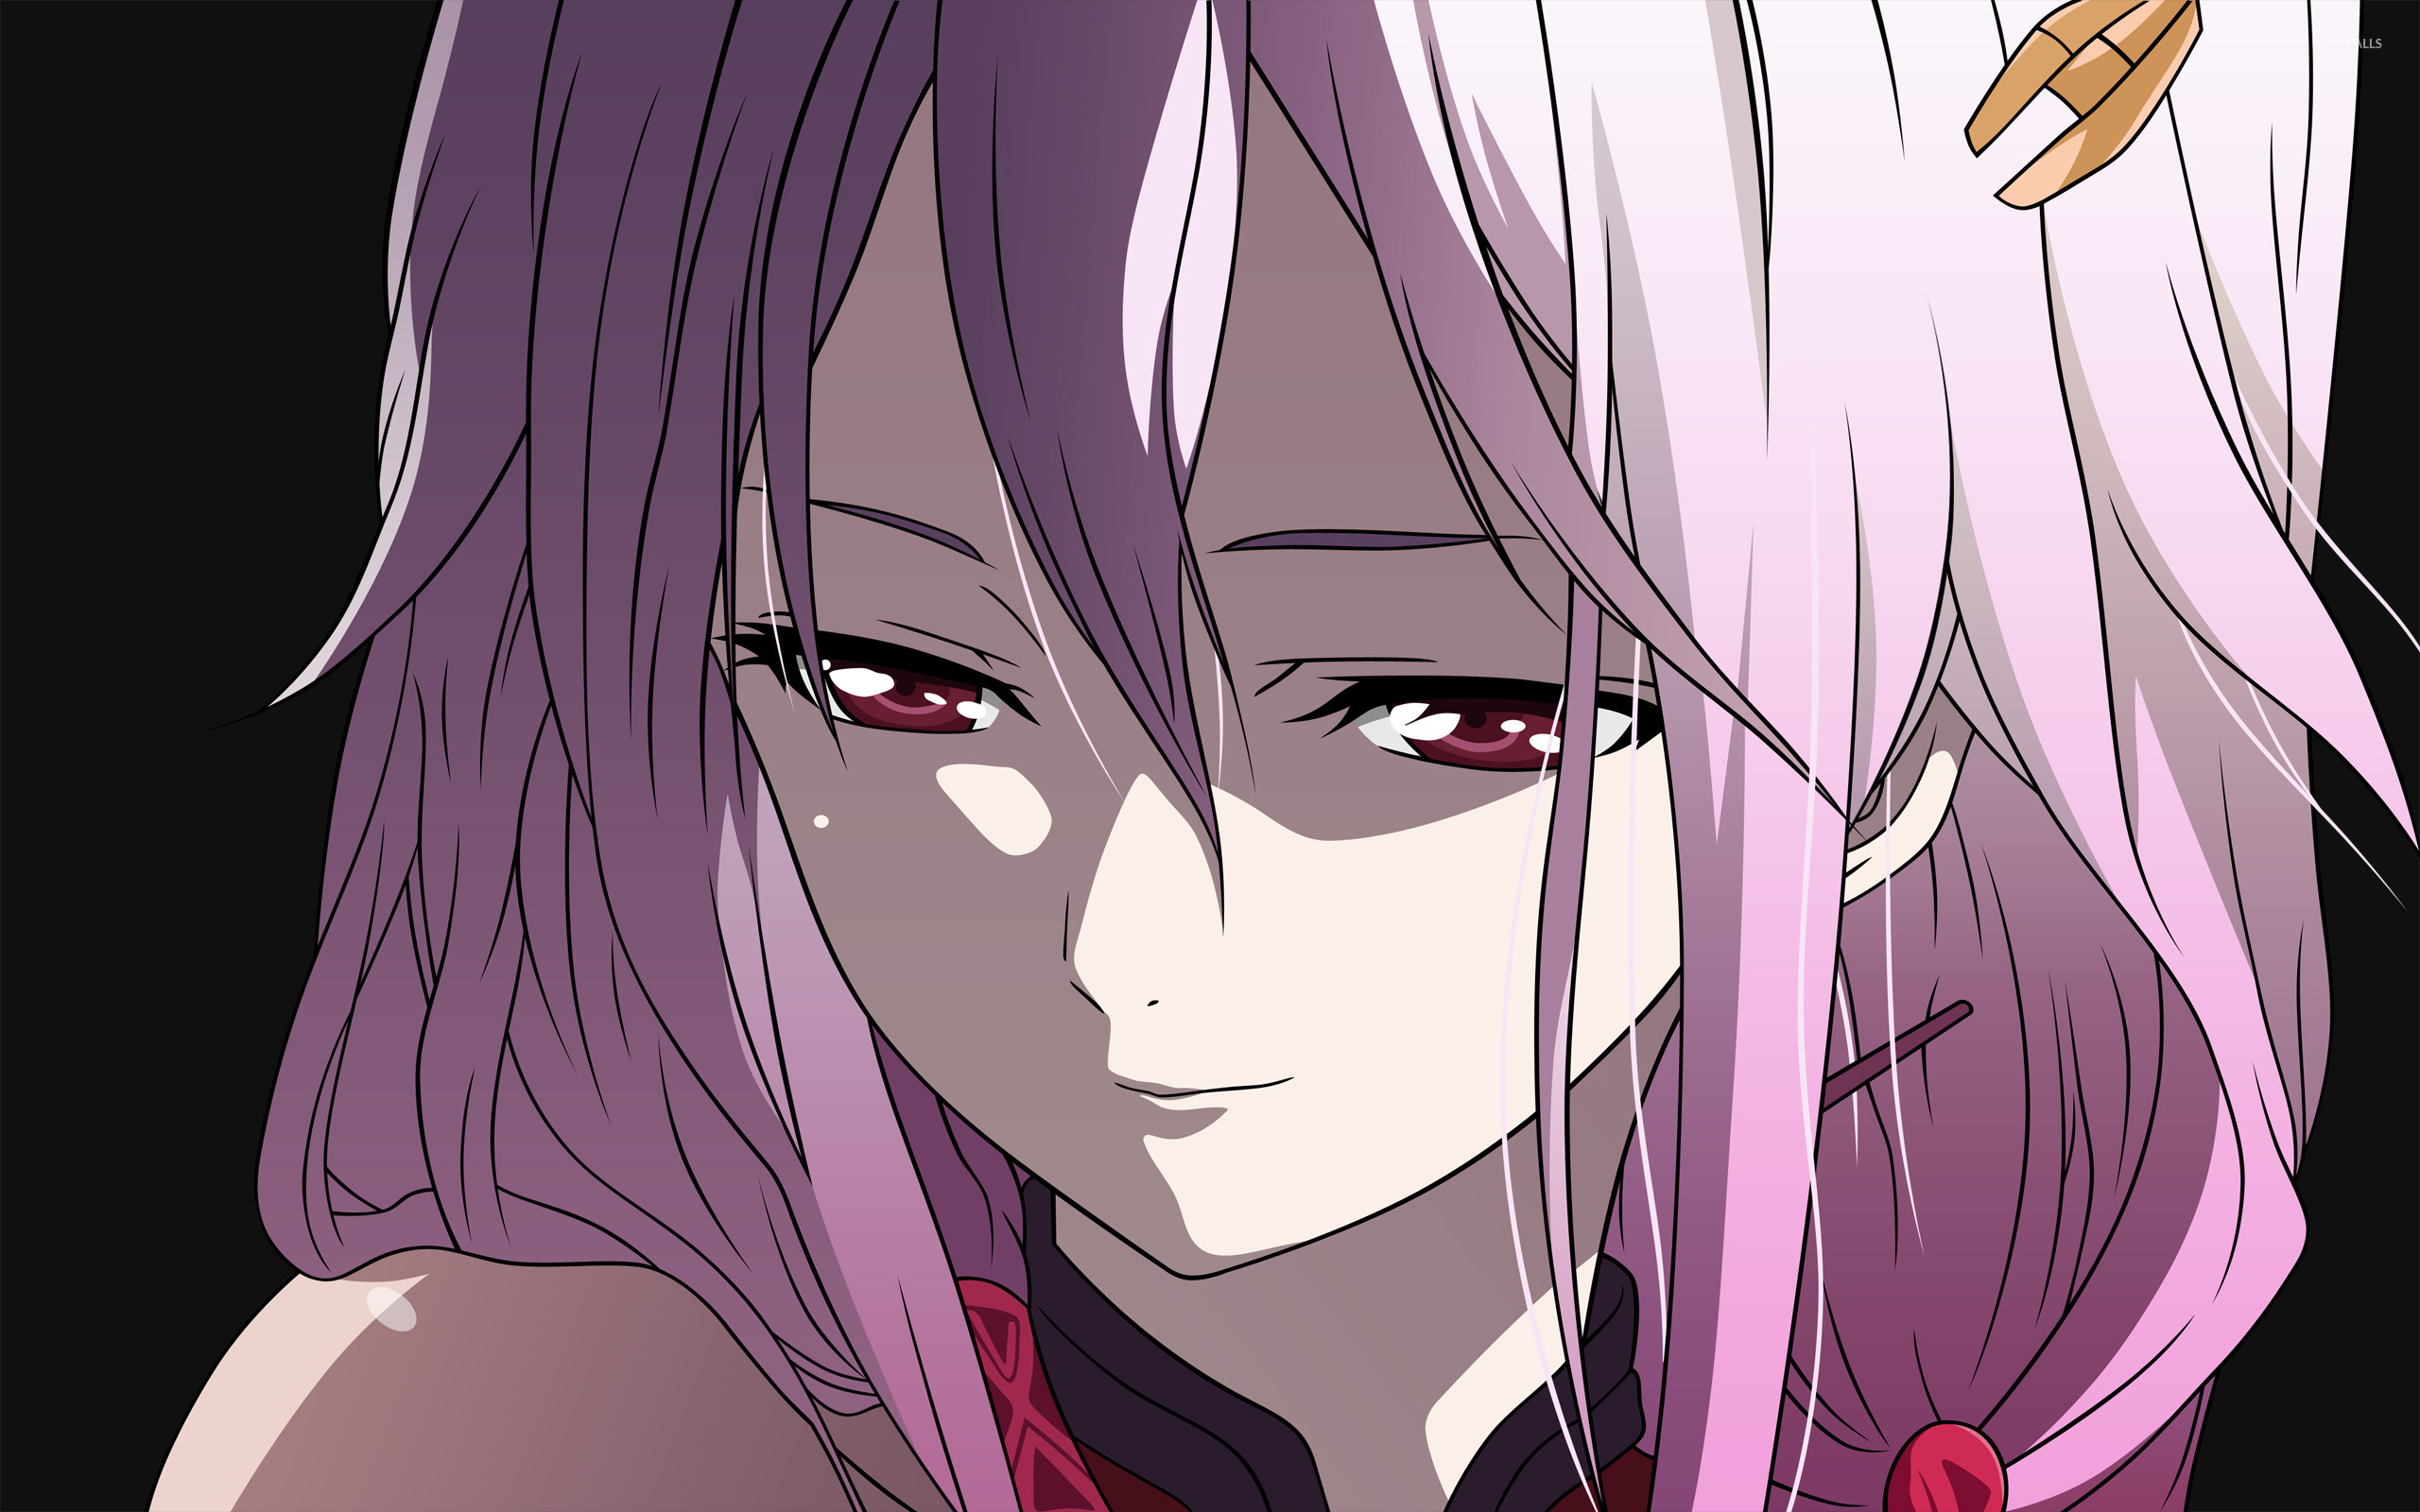 Free Download Inori Yuzuriha Guilty Crown Wallpaper Anime Wallpapers 9546 [2560x1600] For Your